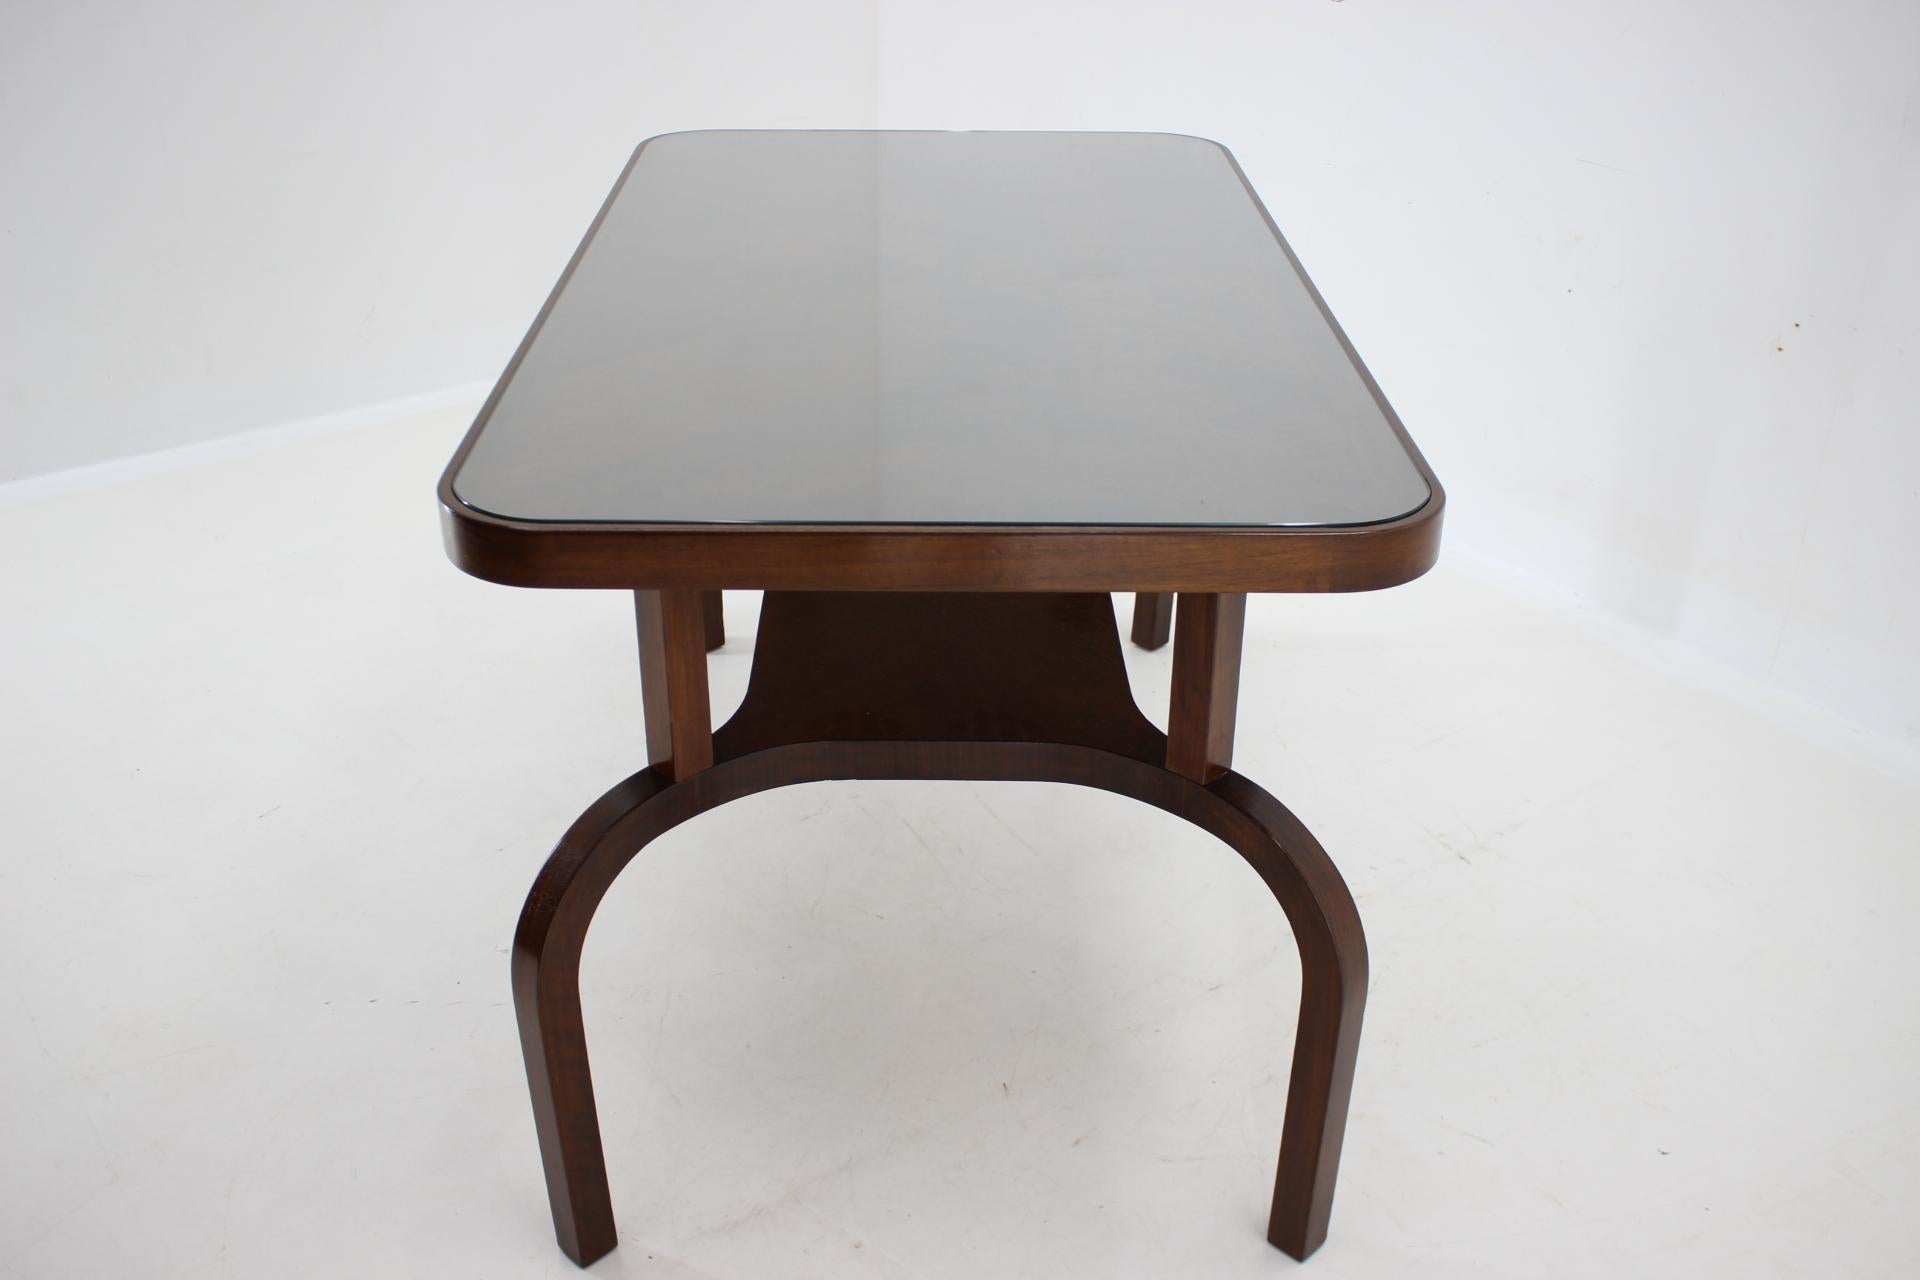 1930s Restored Coffee Table in Walnut with Glass Top, Czechoslovakia For Sale 2